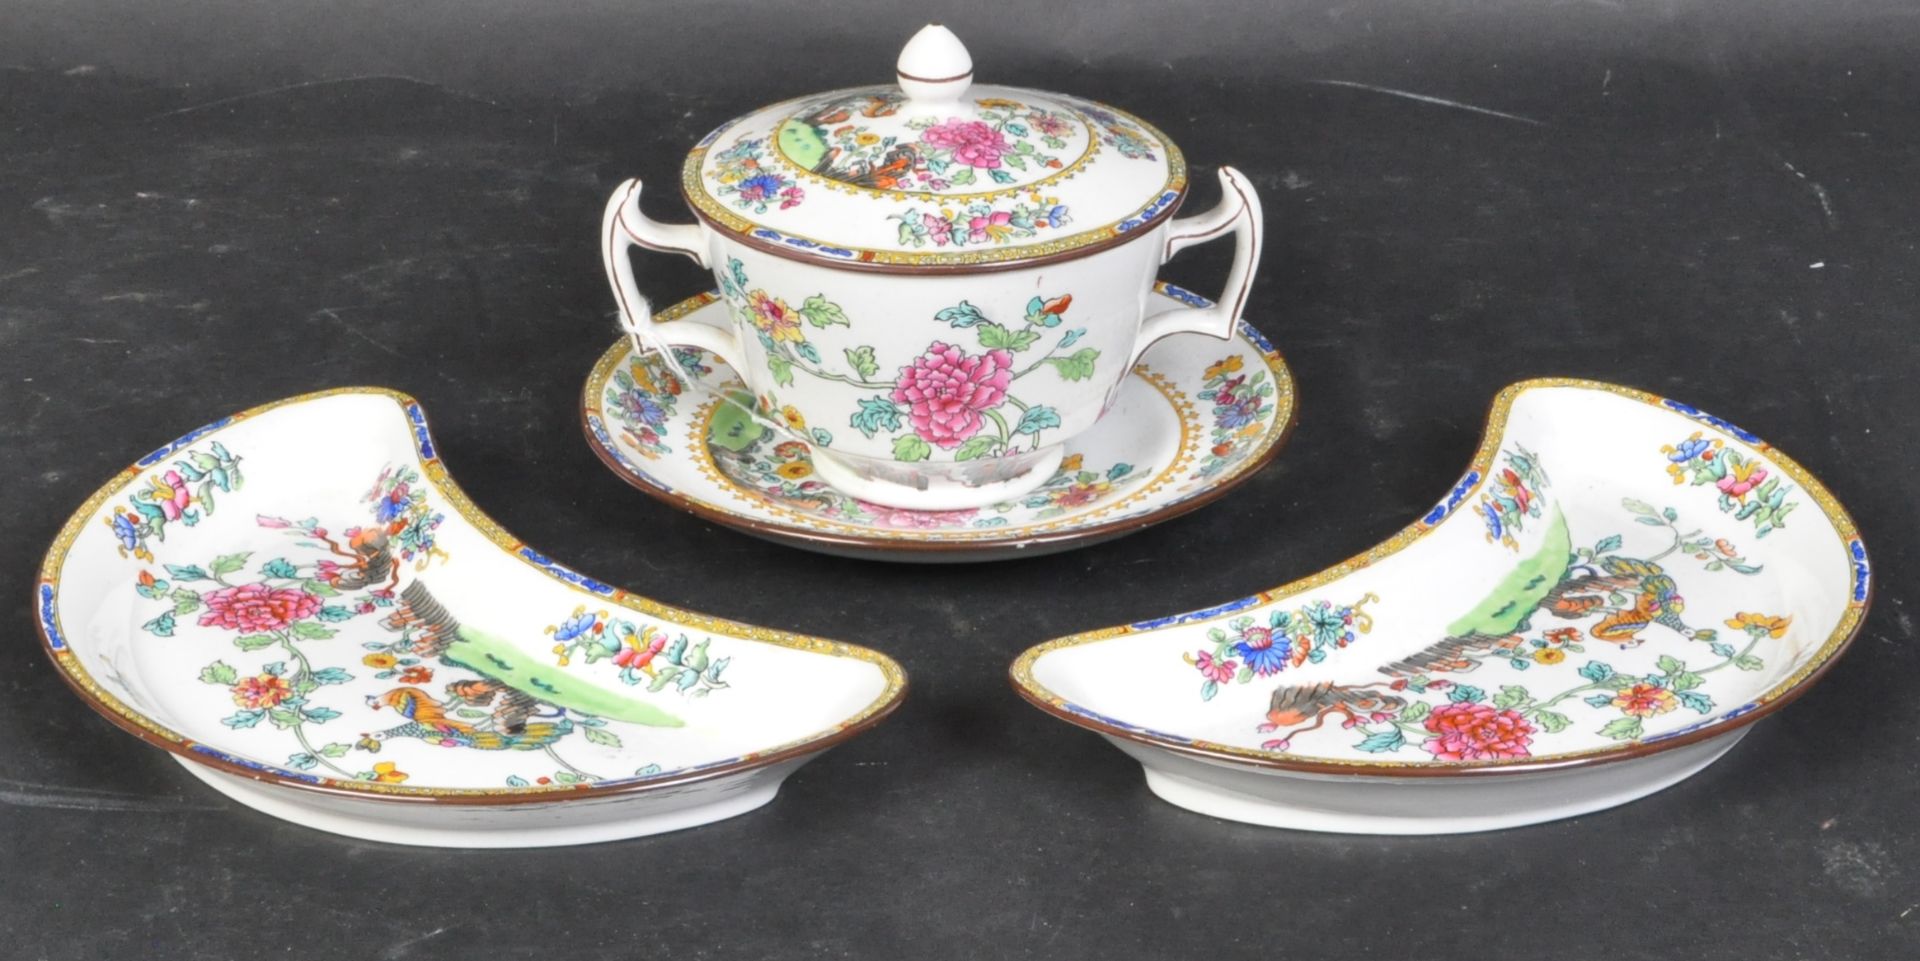 COLLECTION OF 19TH CENTURY COPELAND SPODE PEACOCK CHINA